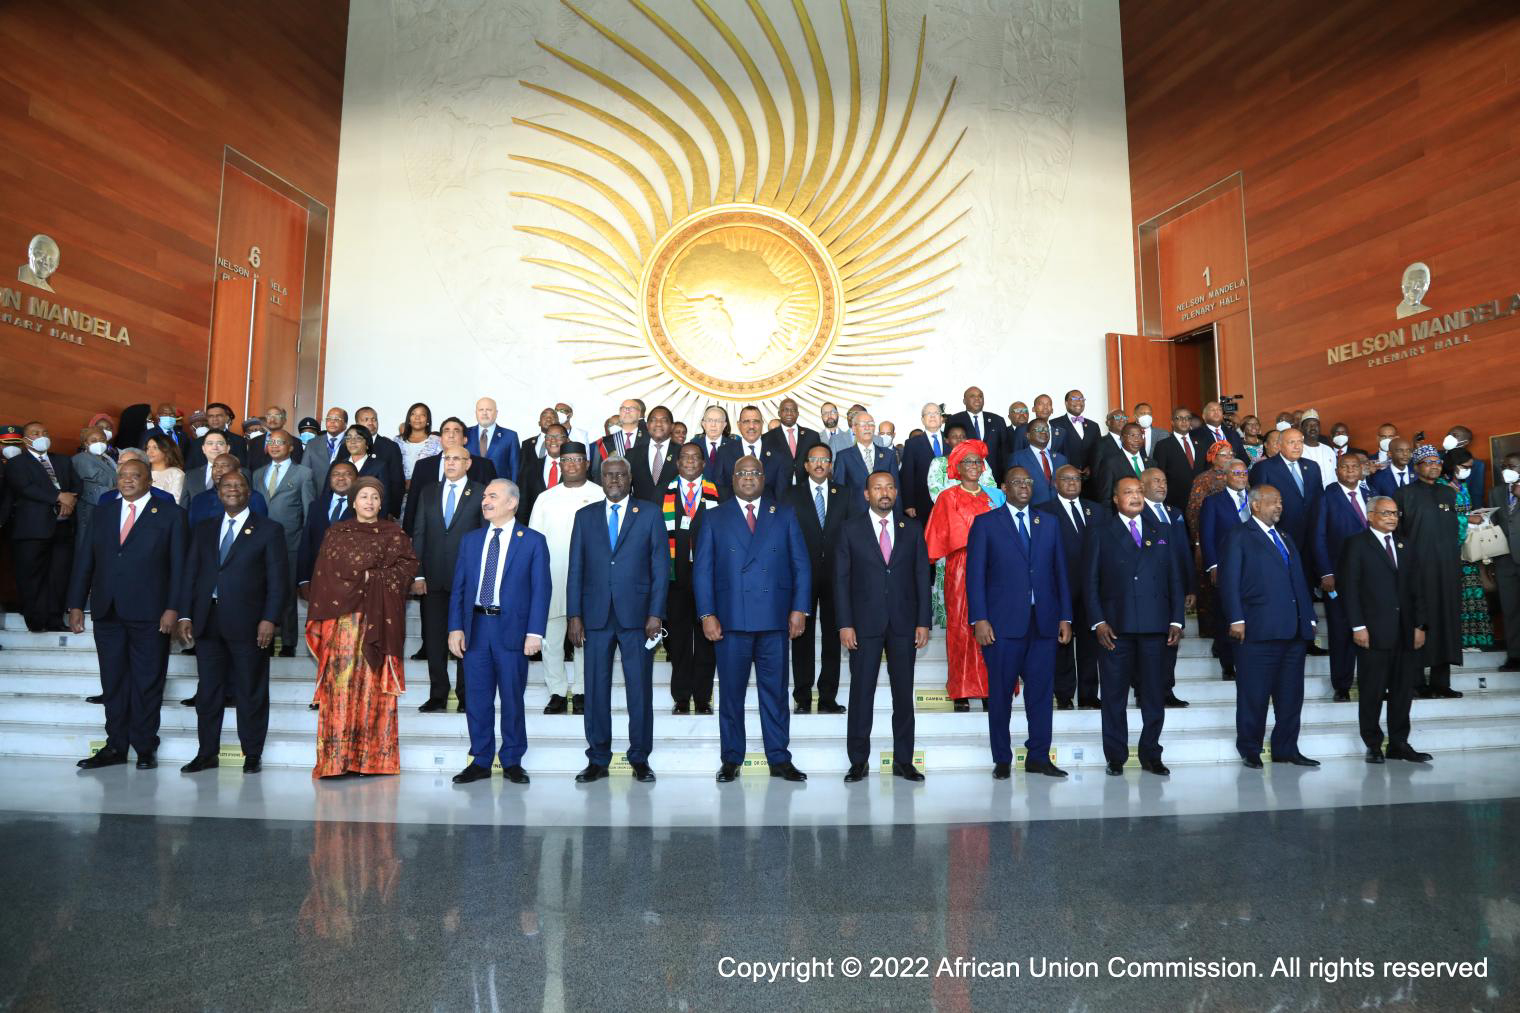 You are currently viewing Israeli Diplomat Kicked Out of African Union Summit | The African Exponent.